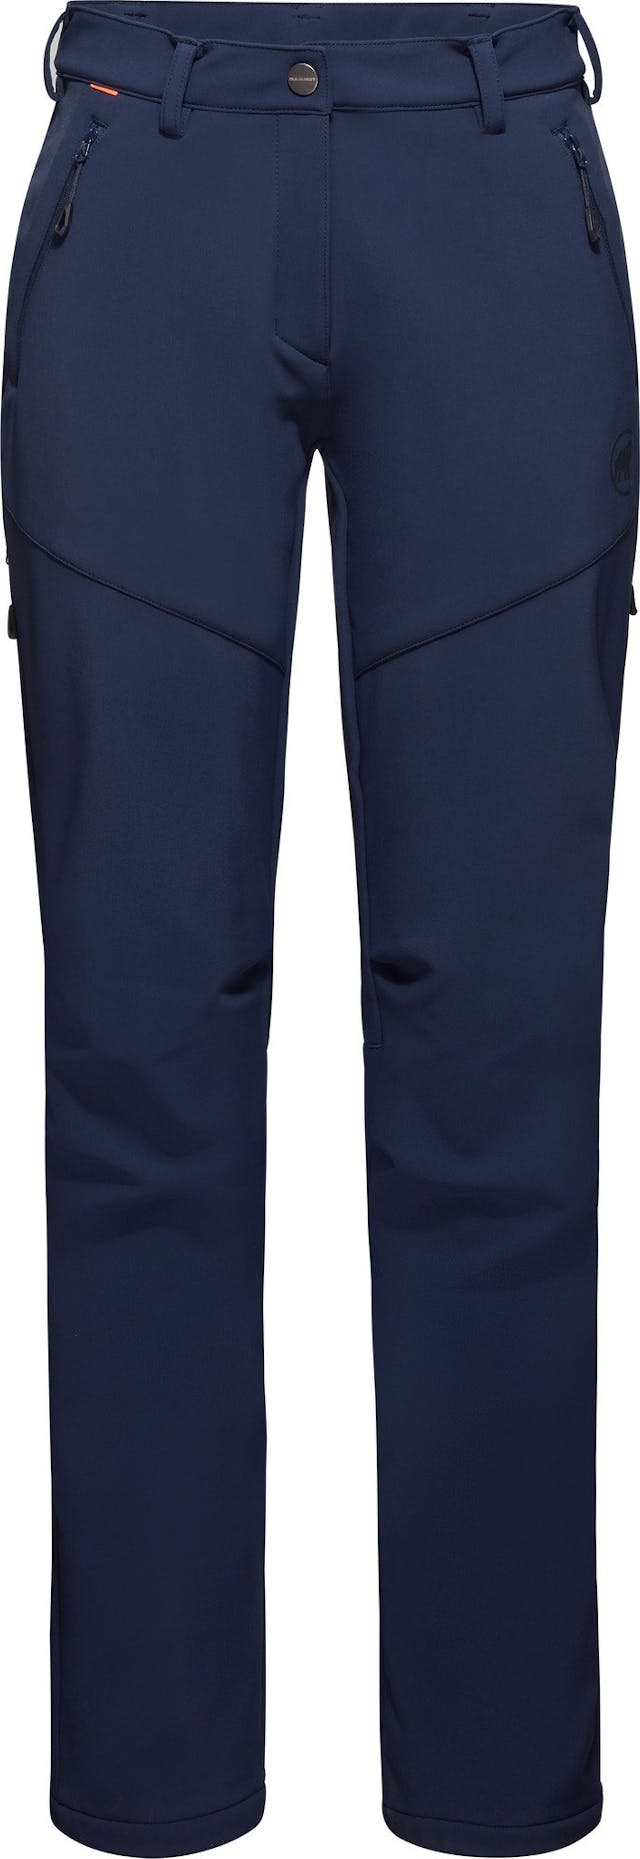 Product image for Winter Hiking SO Pants - Women's